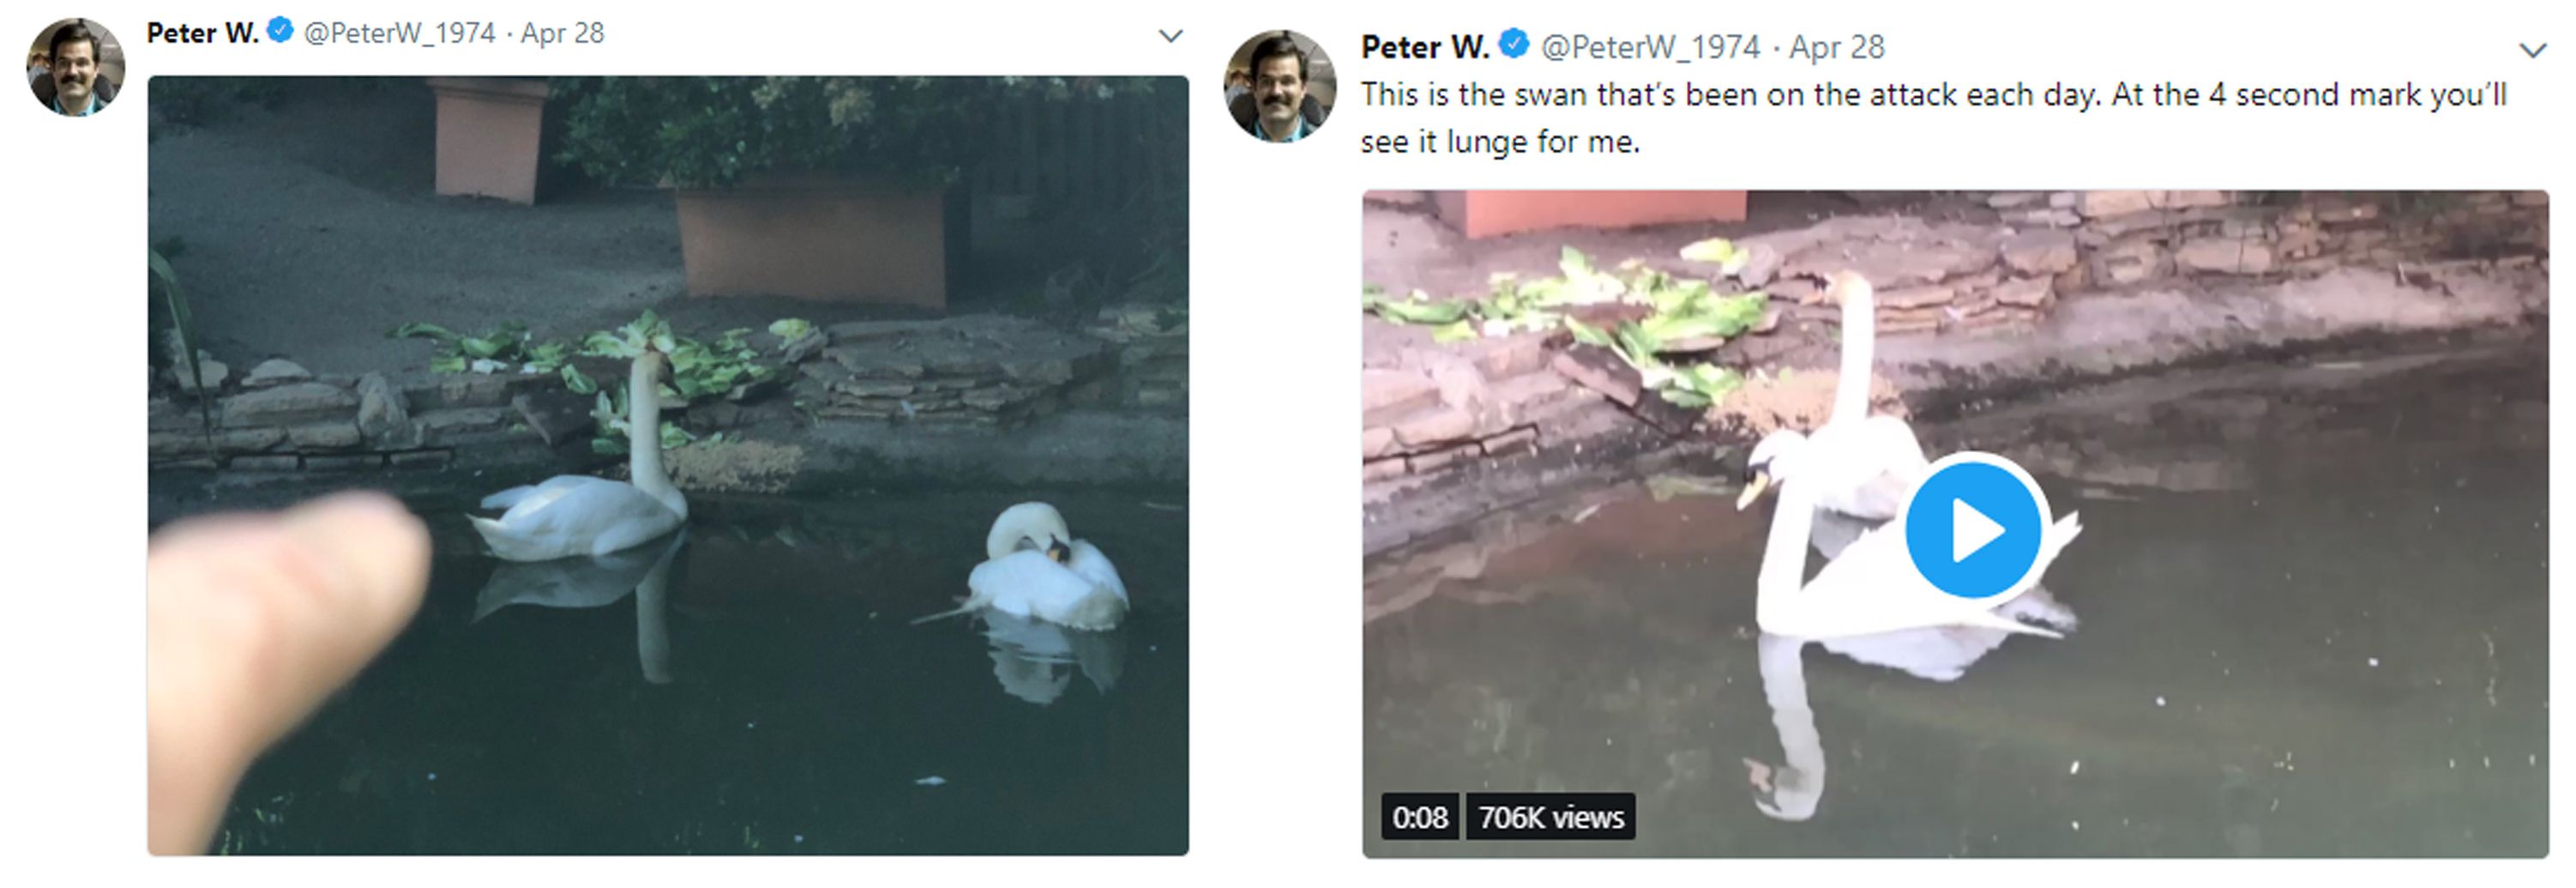 Peter W Hates Swans